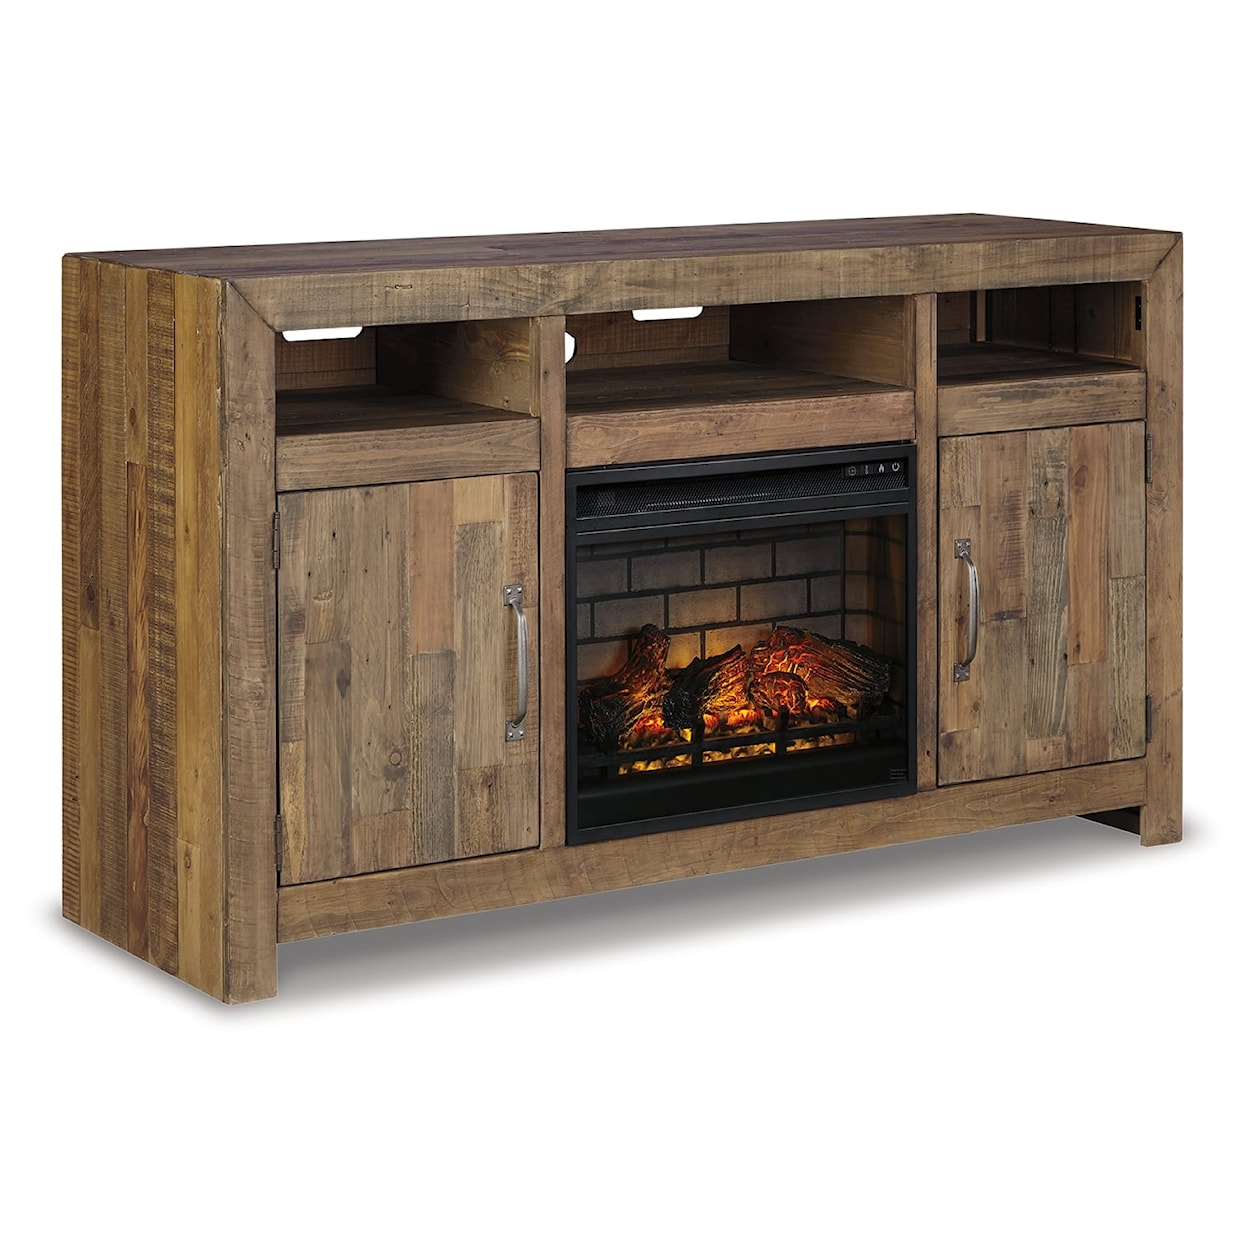 Signature Design by Ashley Furniture Sommerford 62" TV Stand with Electric Fireplace